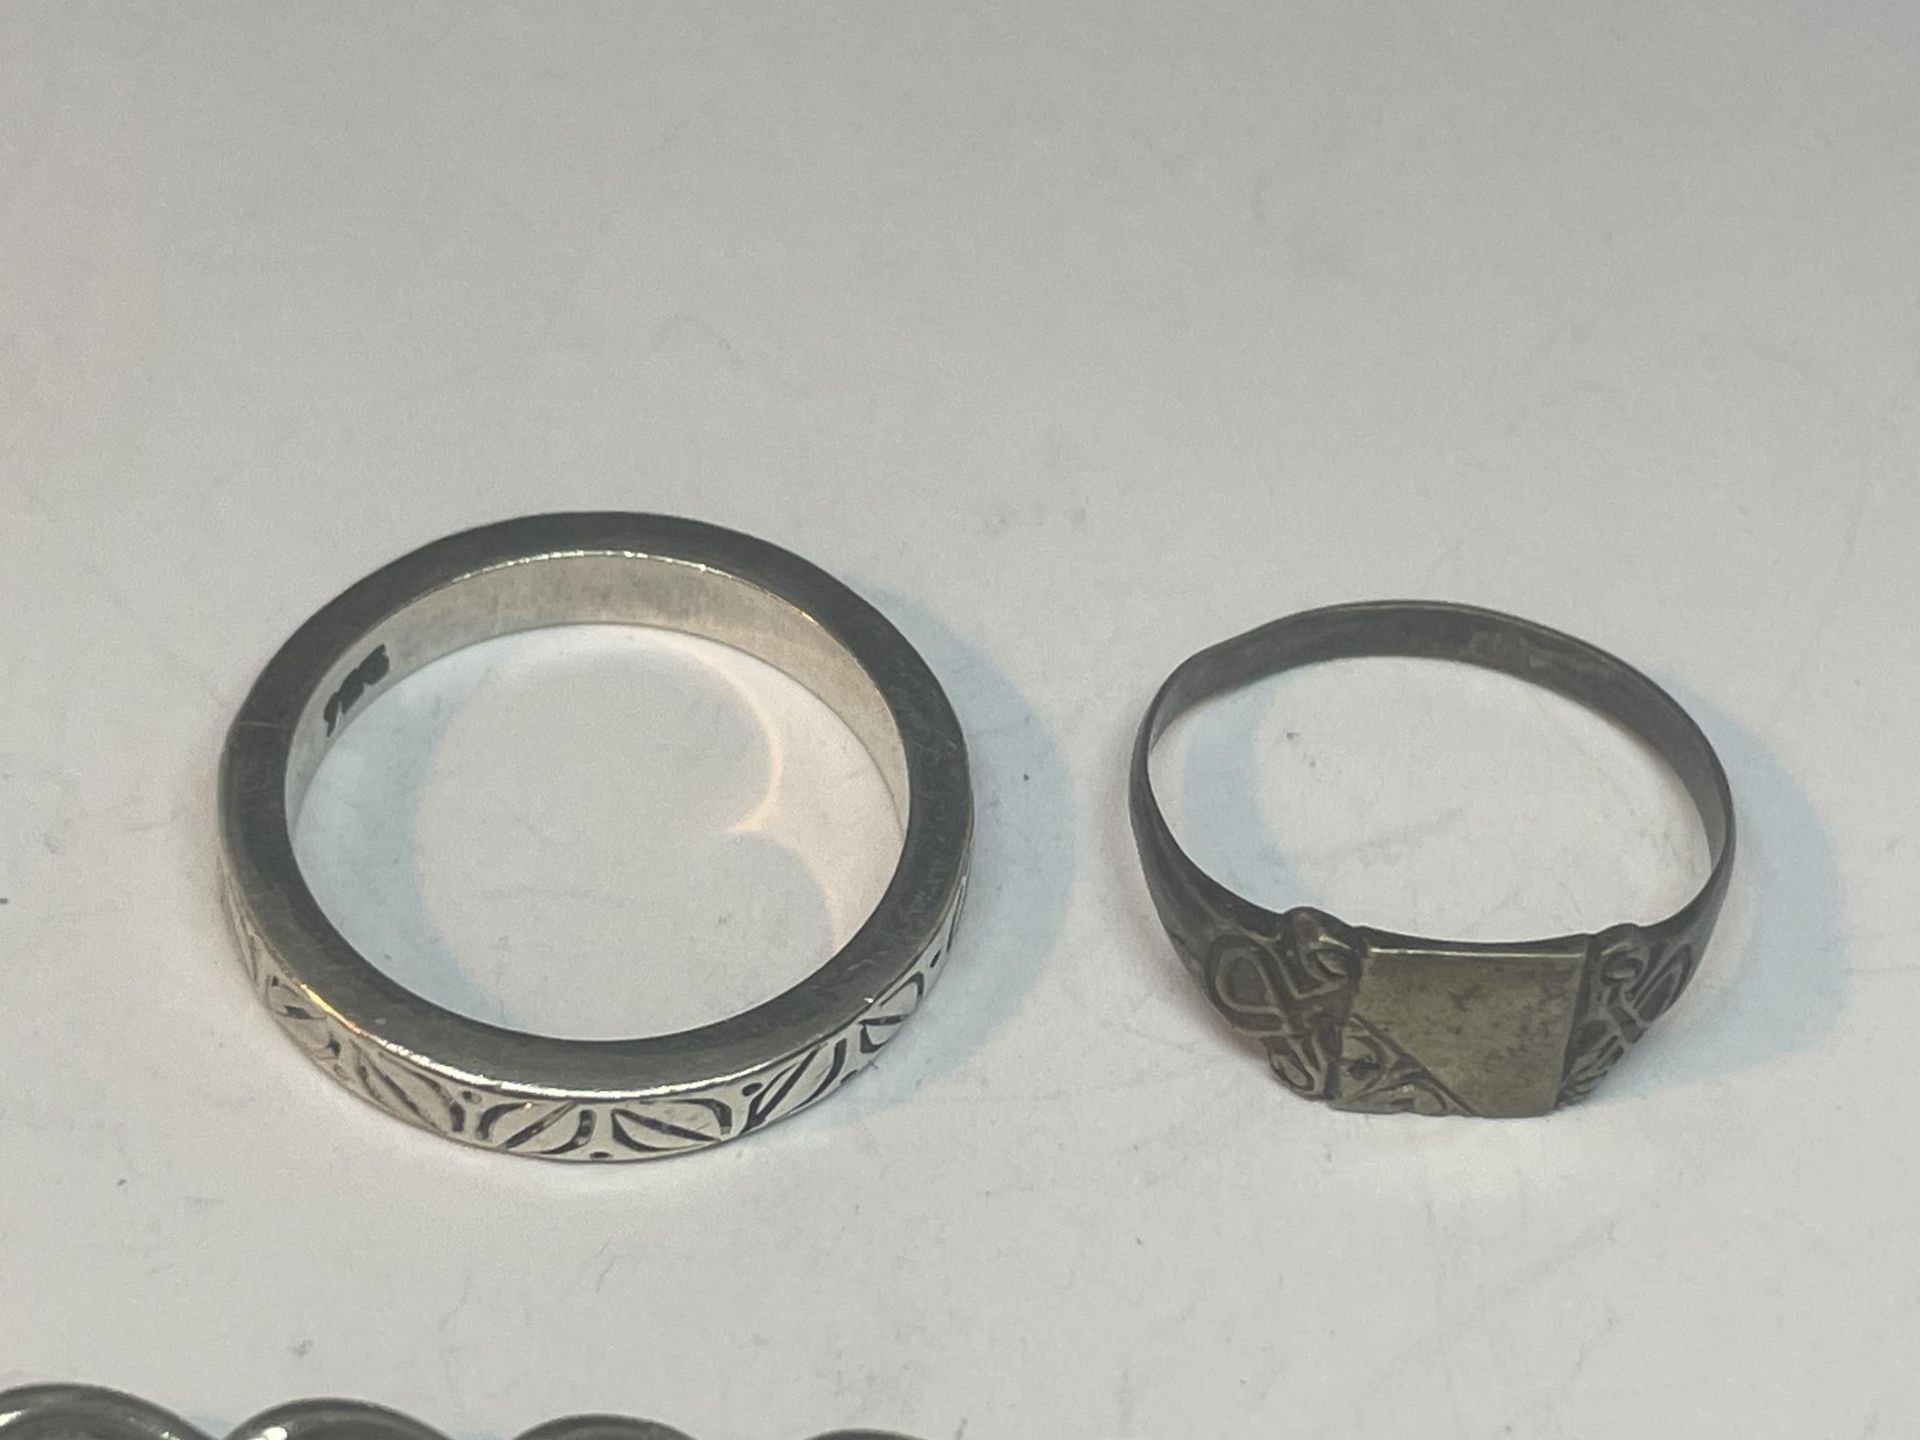 A SILVER BRACELET AND TWO SILVER RINGS - Image 2 of 3